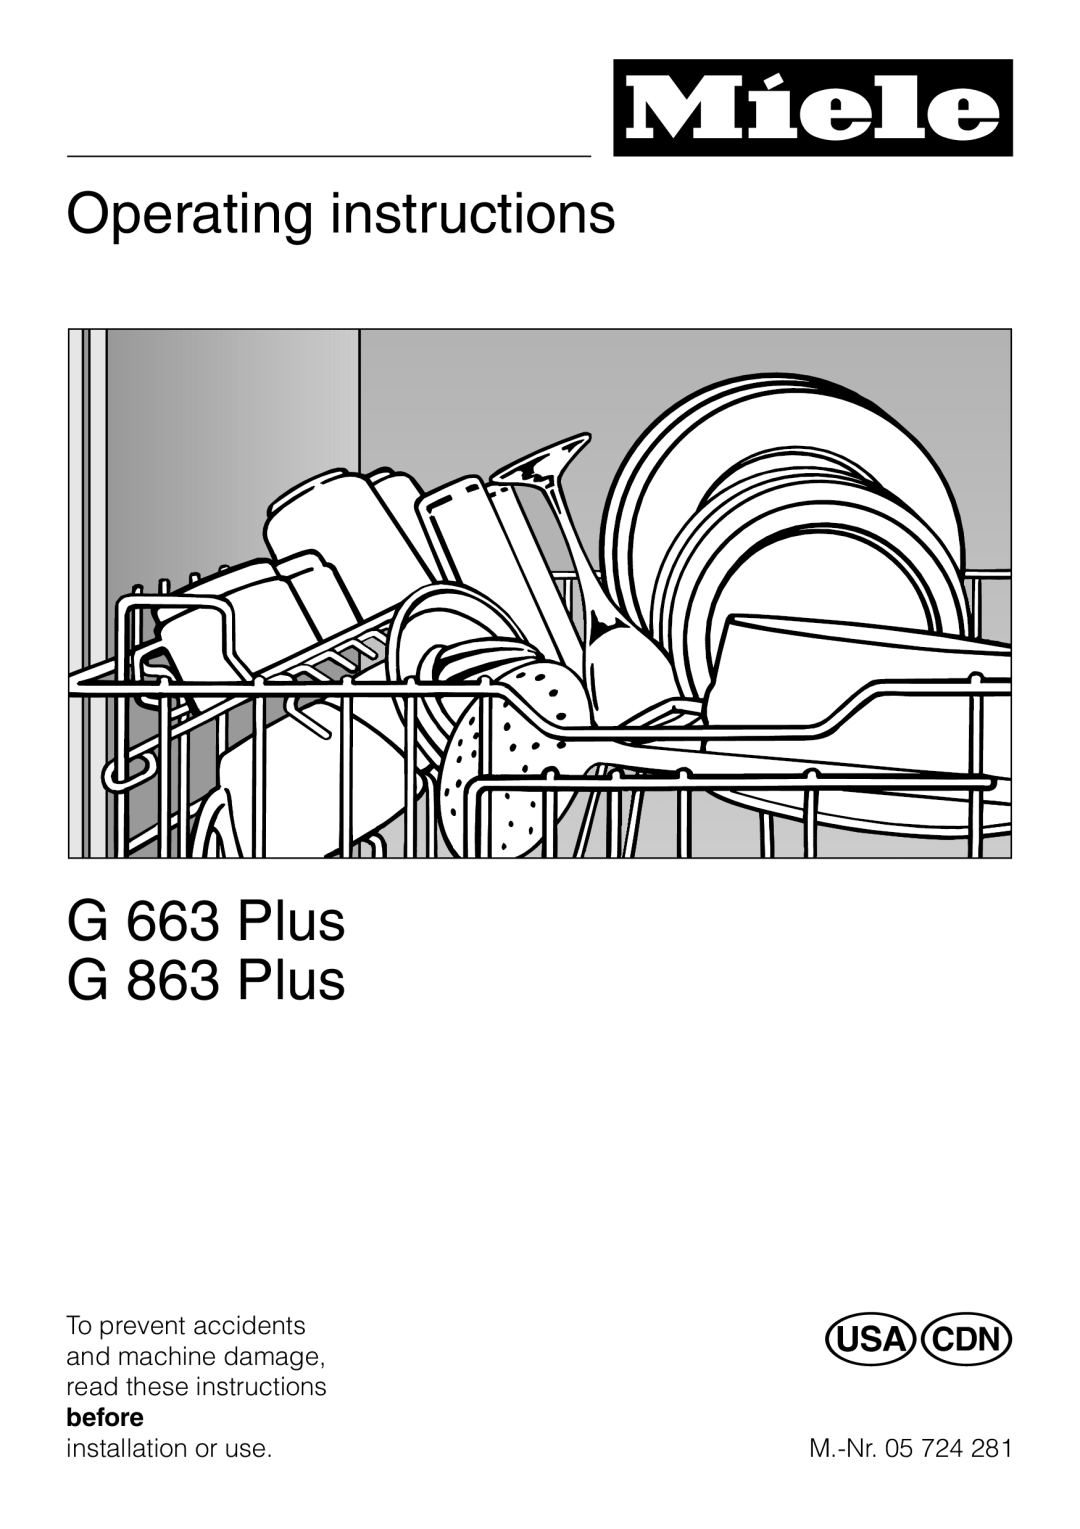 Miele G 663 PLUS, G 863 PLUS operating instructions Operating instructions, G 663 Plus, G 863 Plus 